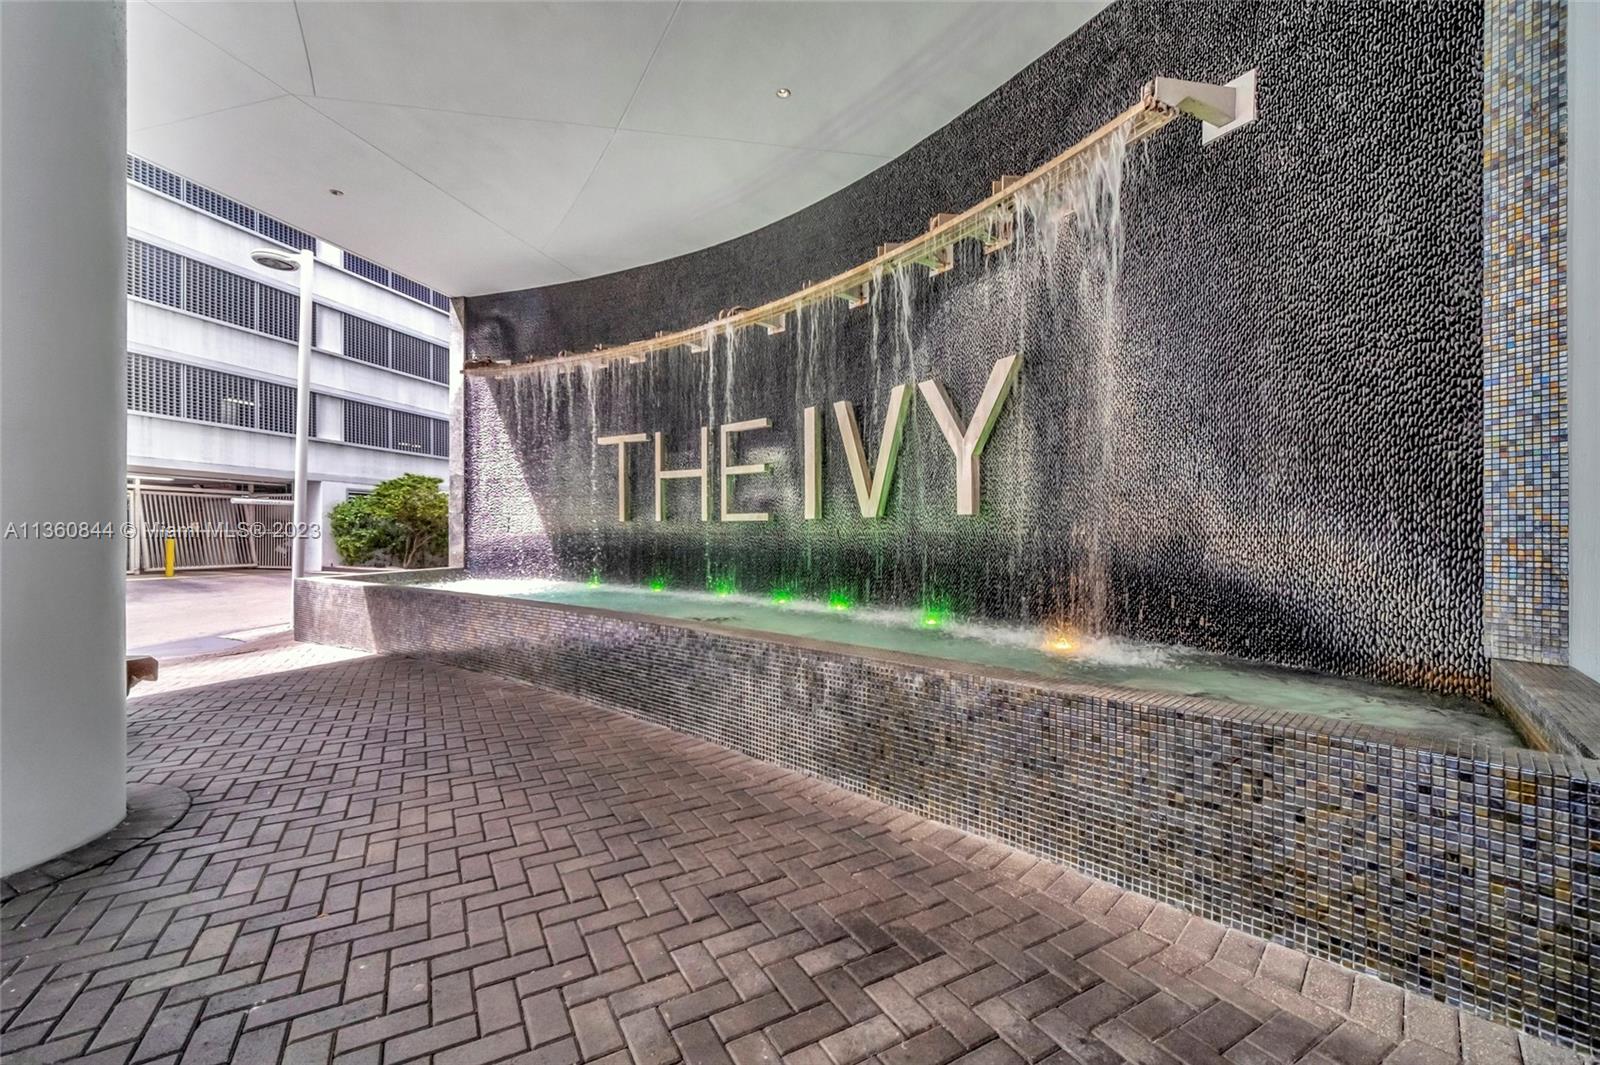 Do not miss this opportunity to own an incredible 2 BED 2 BATH condo in The Ivy. This prestigious building is located in the exclusive and gated Riverfront community. Enjoy incredible views of the city from your private and oversized balcony. Split floor plan and both bedrooms are en-suite. Updated flooring throughout and the washer/dryer are in the unit. The Ivy boasts incredible amenities including a resort like infinity pool, gym, bbq area, lap pool, sauna, spa, club room, valet, and 24-7 security. The location is perfect! Right near your major highways and just steps from Brickell City Centre and Mary Brickell Village.